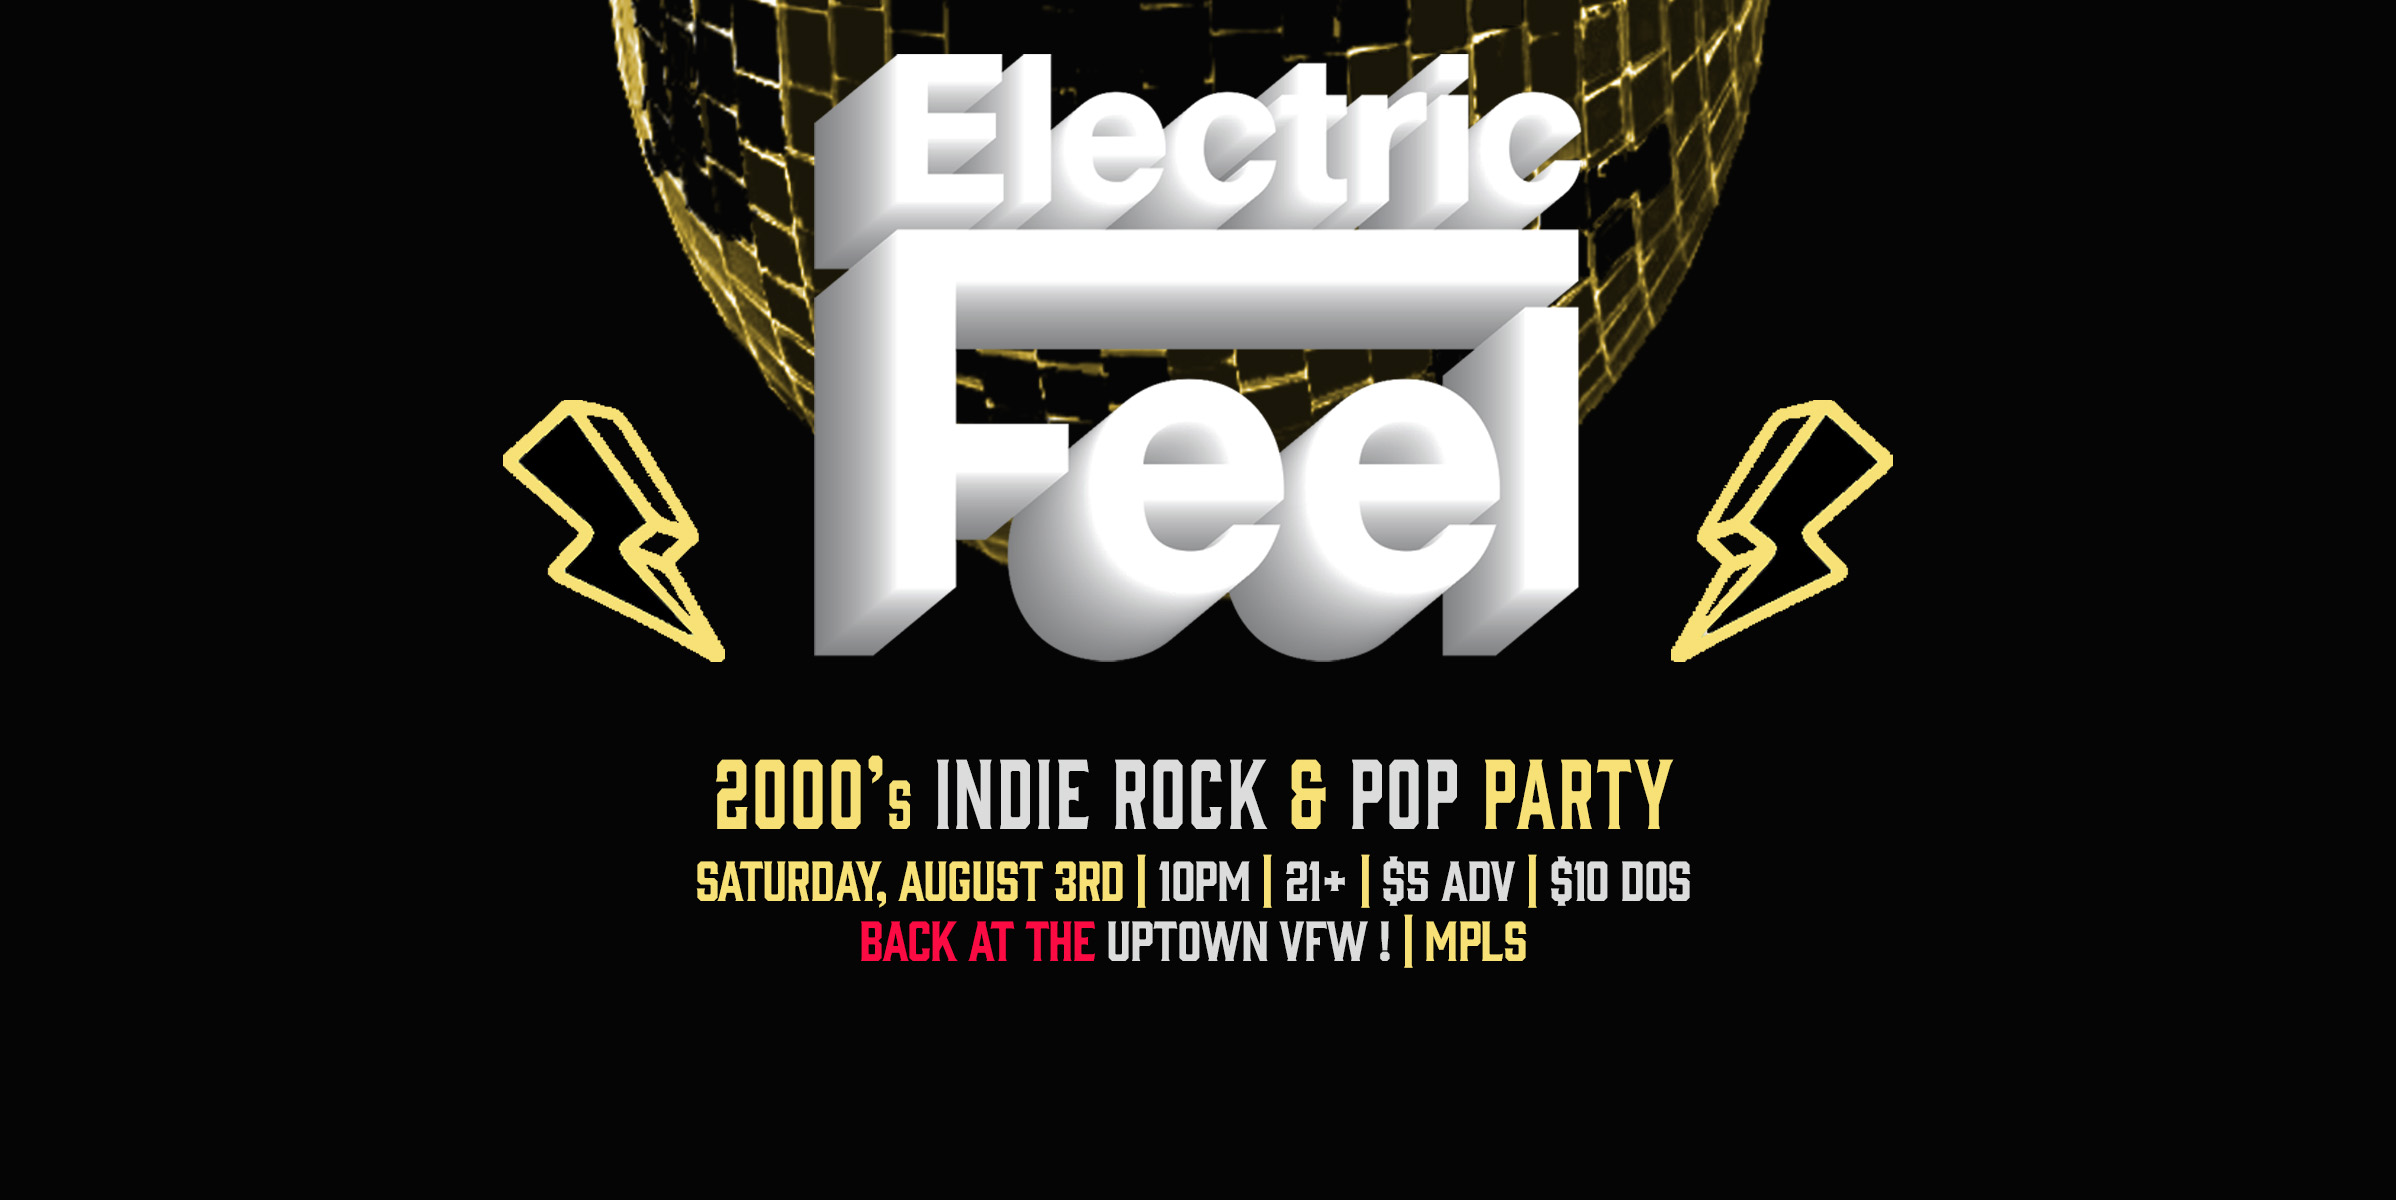 Electric Feel: 2000's Indie Rock & Pop Party! IS BACK!!! Saturday, August 3rd James Ballentine "Uptown" VFW Post 246 2916 Lyndale Ave S Mpls. Doors 10 pm:: Music 10 pm-2 am:: 21+ GA: $5 ADV / $10 DOS